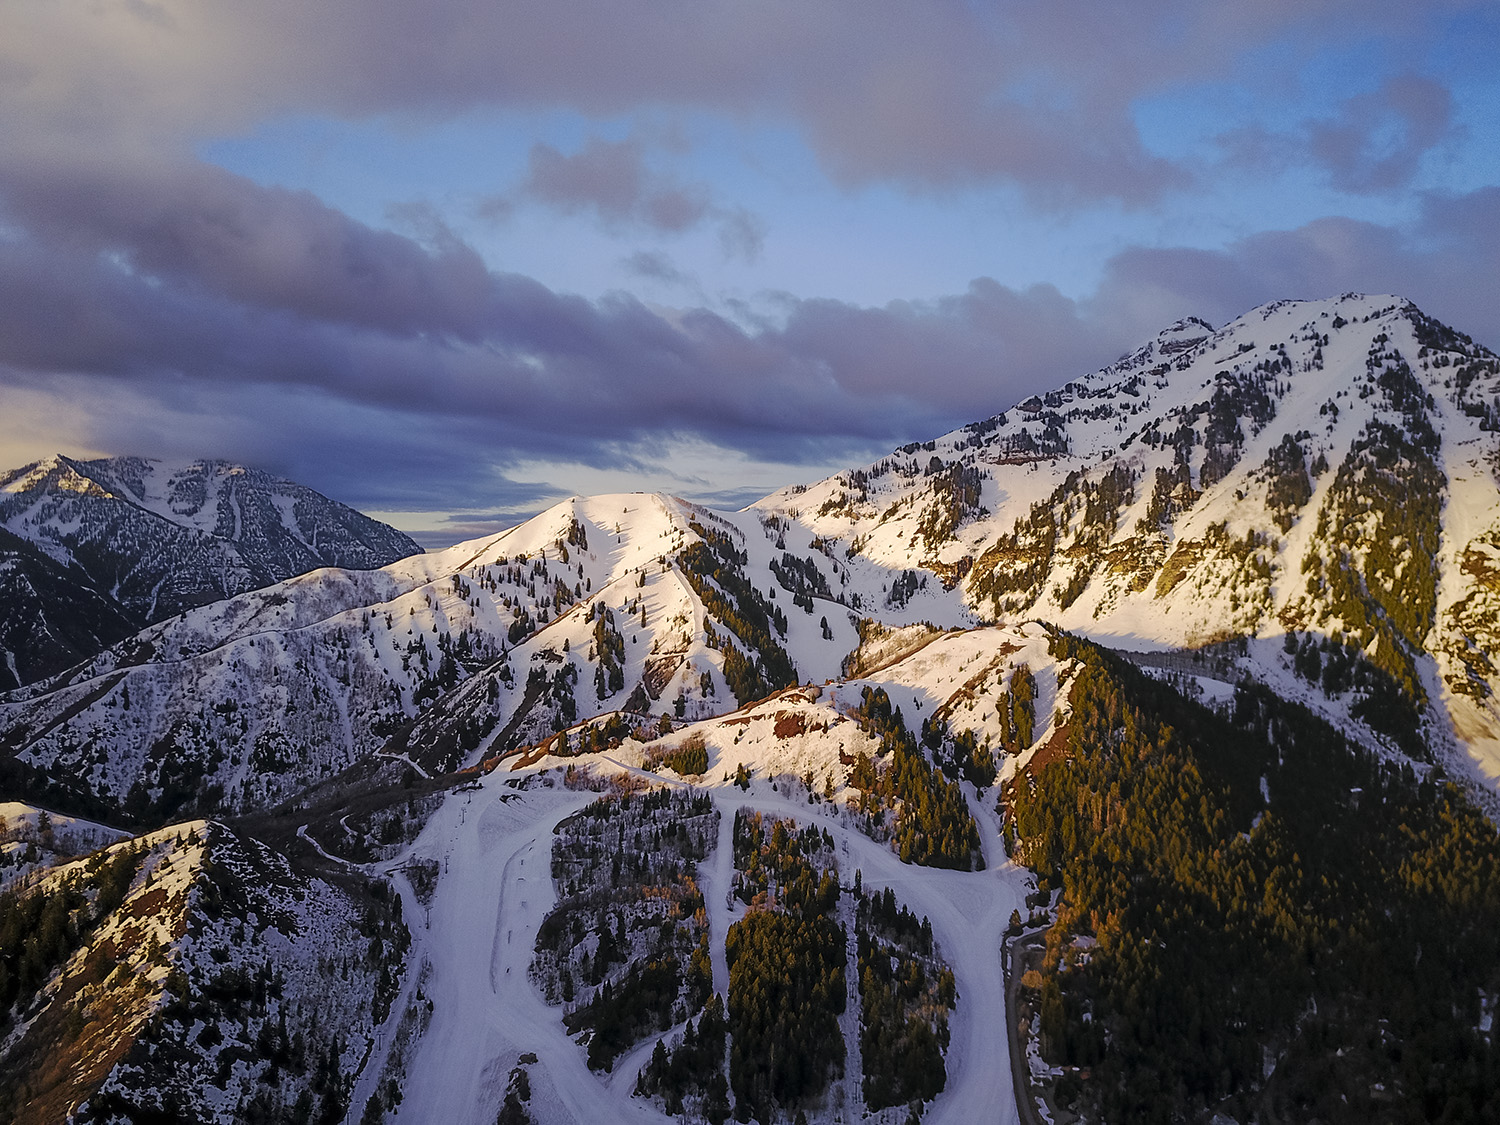 Sundance Mountain Resort Announces Plan For Two New Chairlifts | Unofficial  Networks